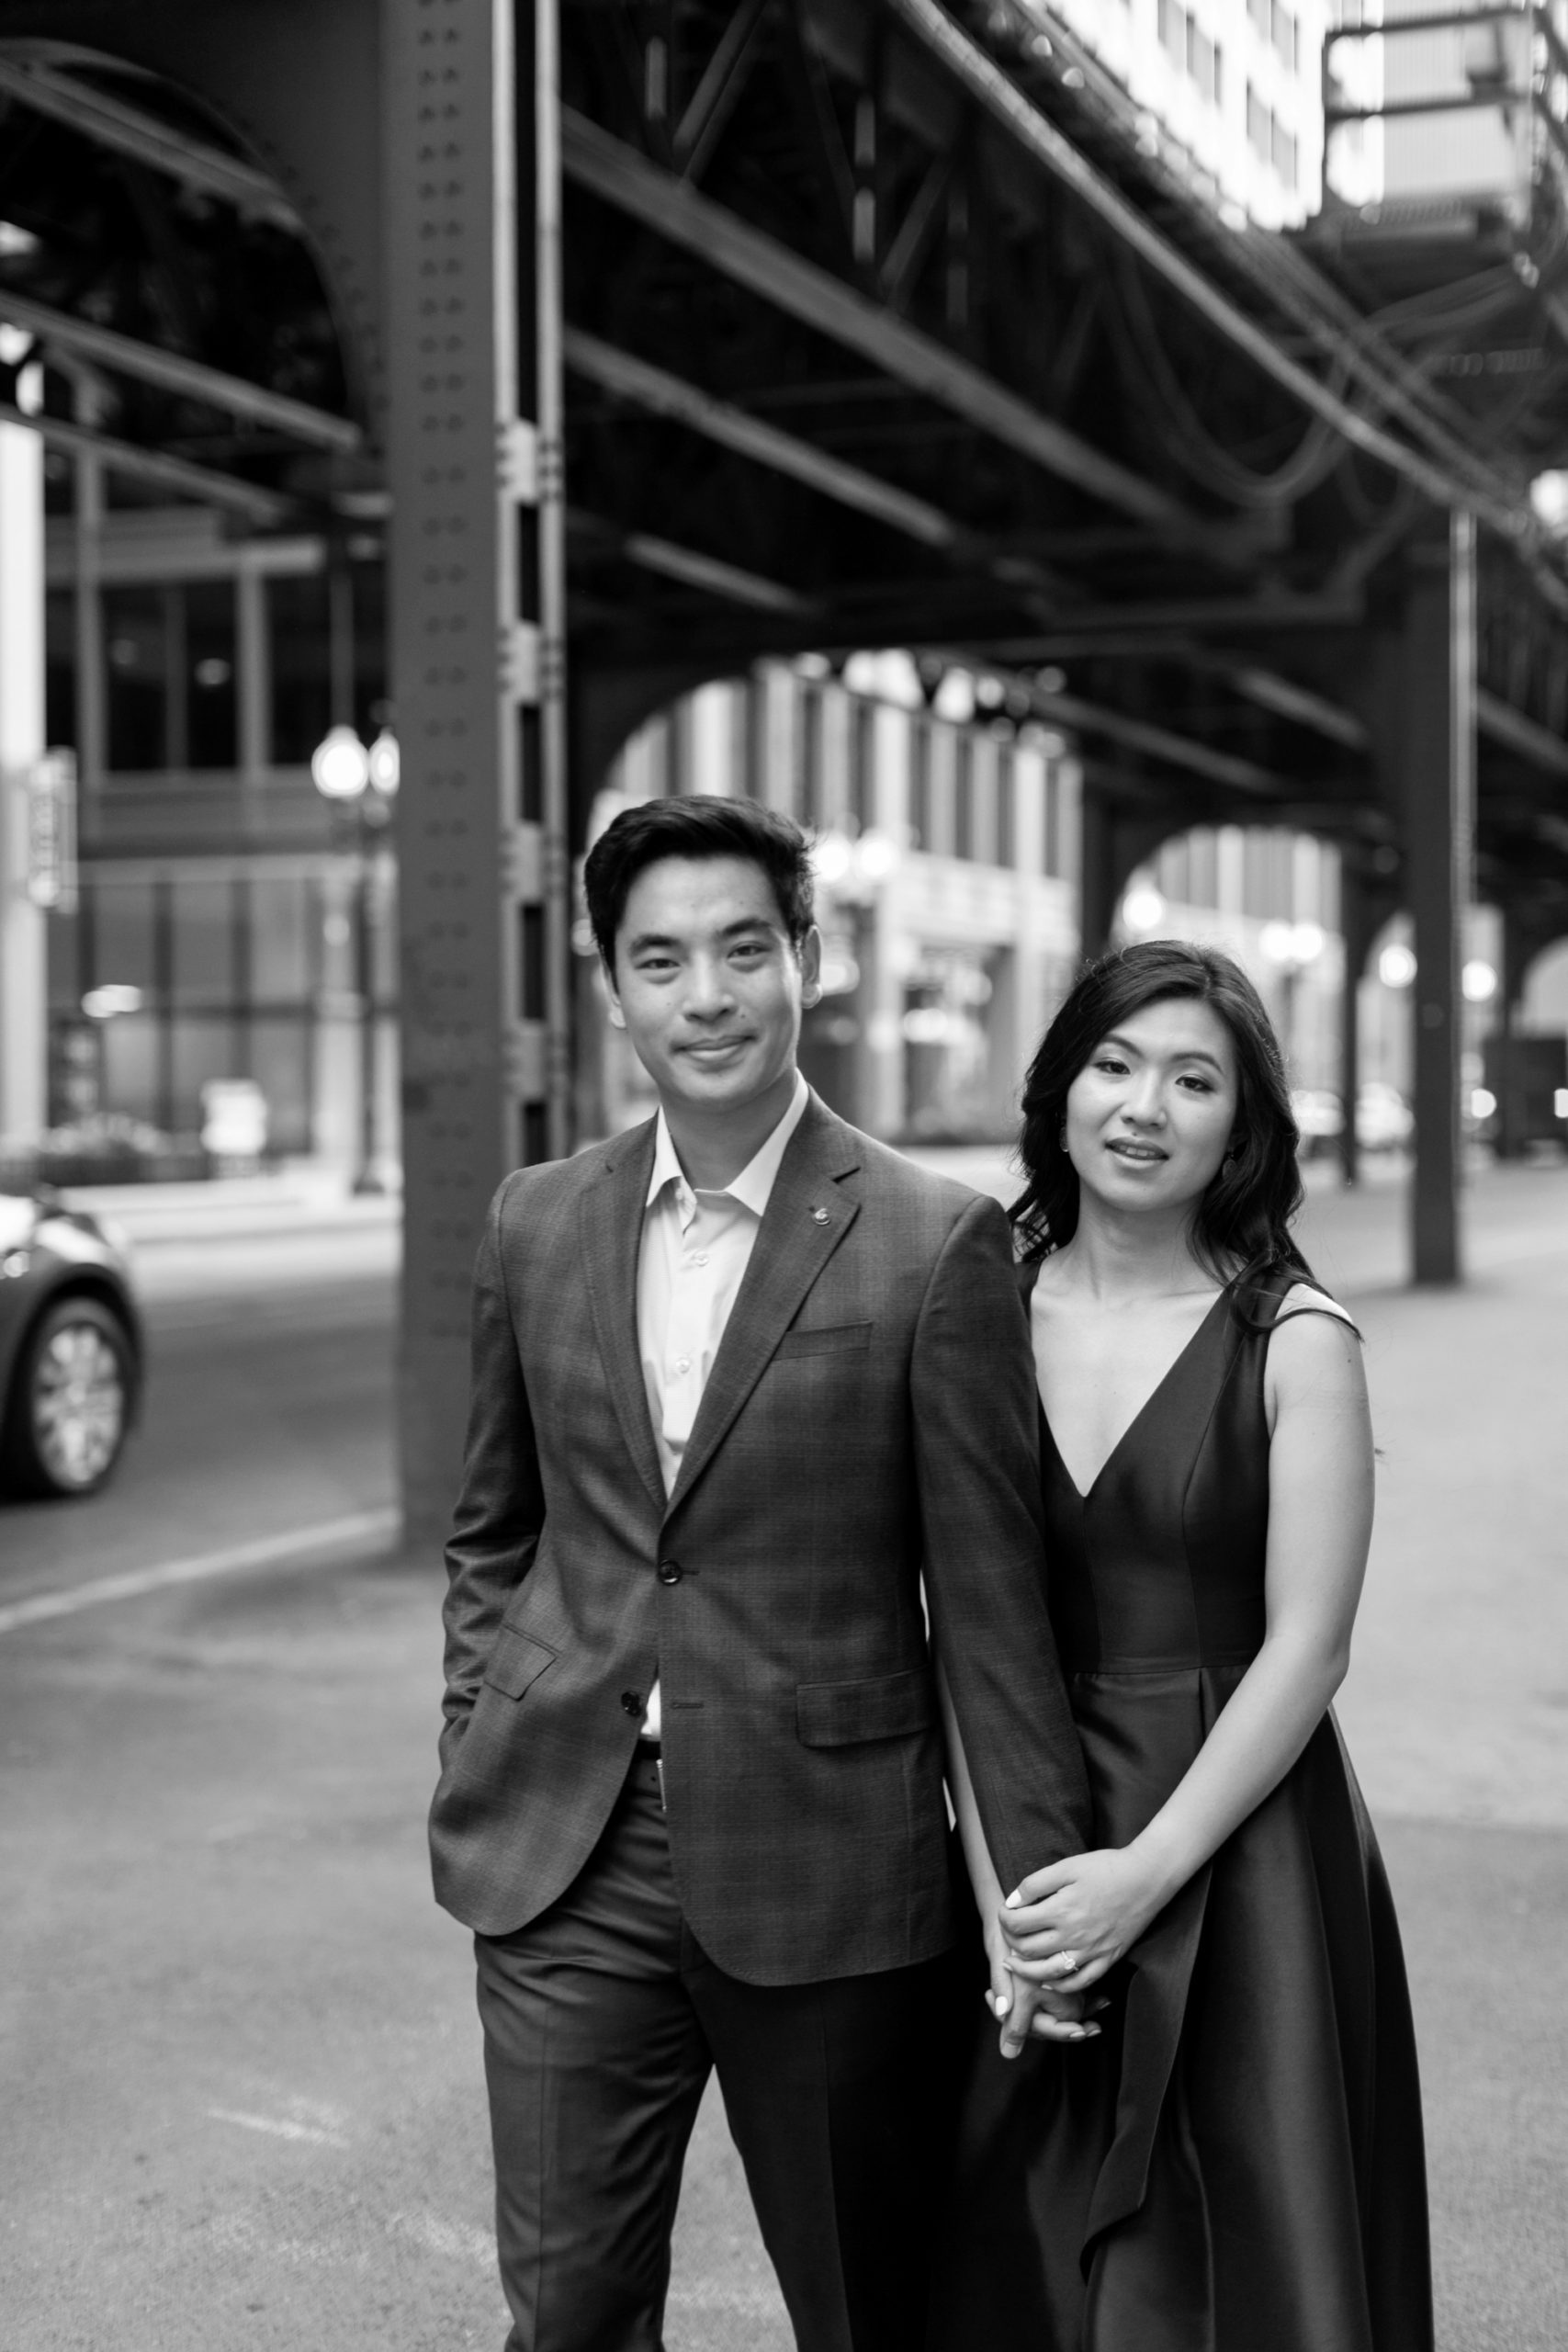 the couple smiled at the camera during their Chicago engagement photo shoot